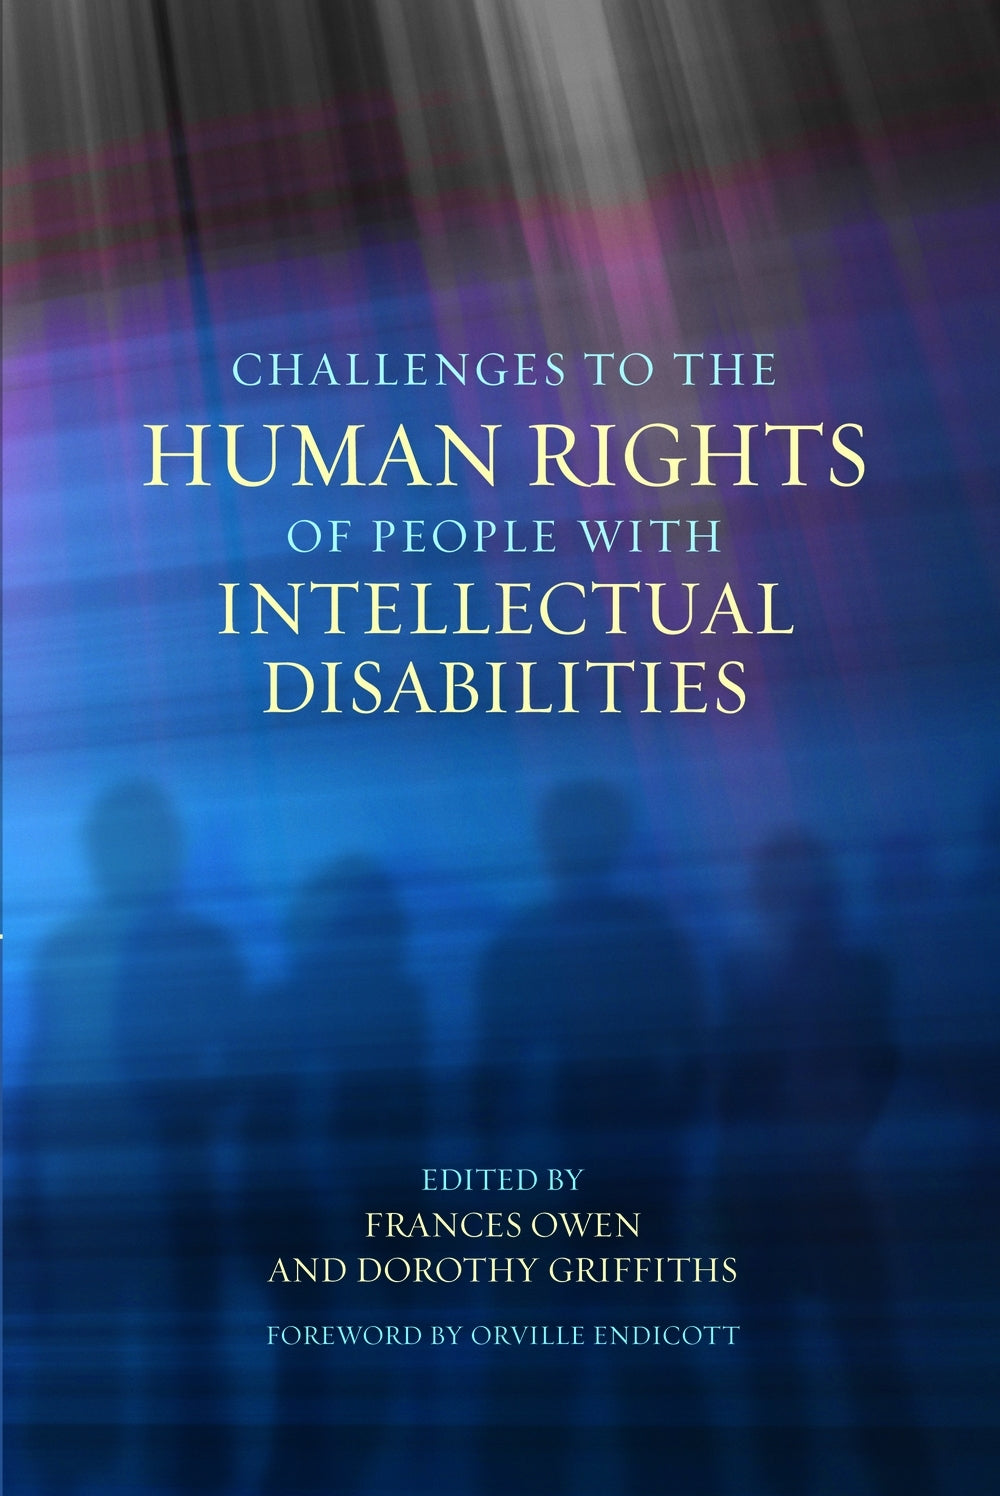 Challenges to the Human Rights of People with Intellectual Disabilities by Dorothy Griffiths, Orville Endicott, Frances Owen